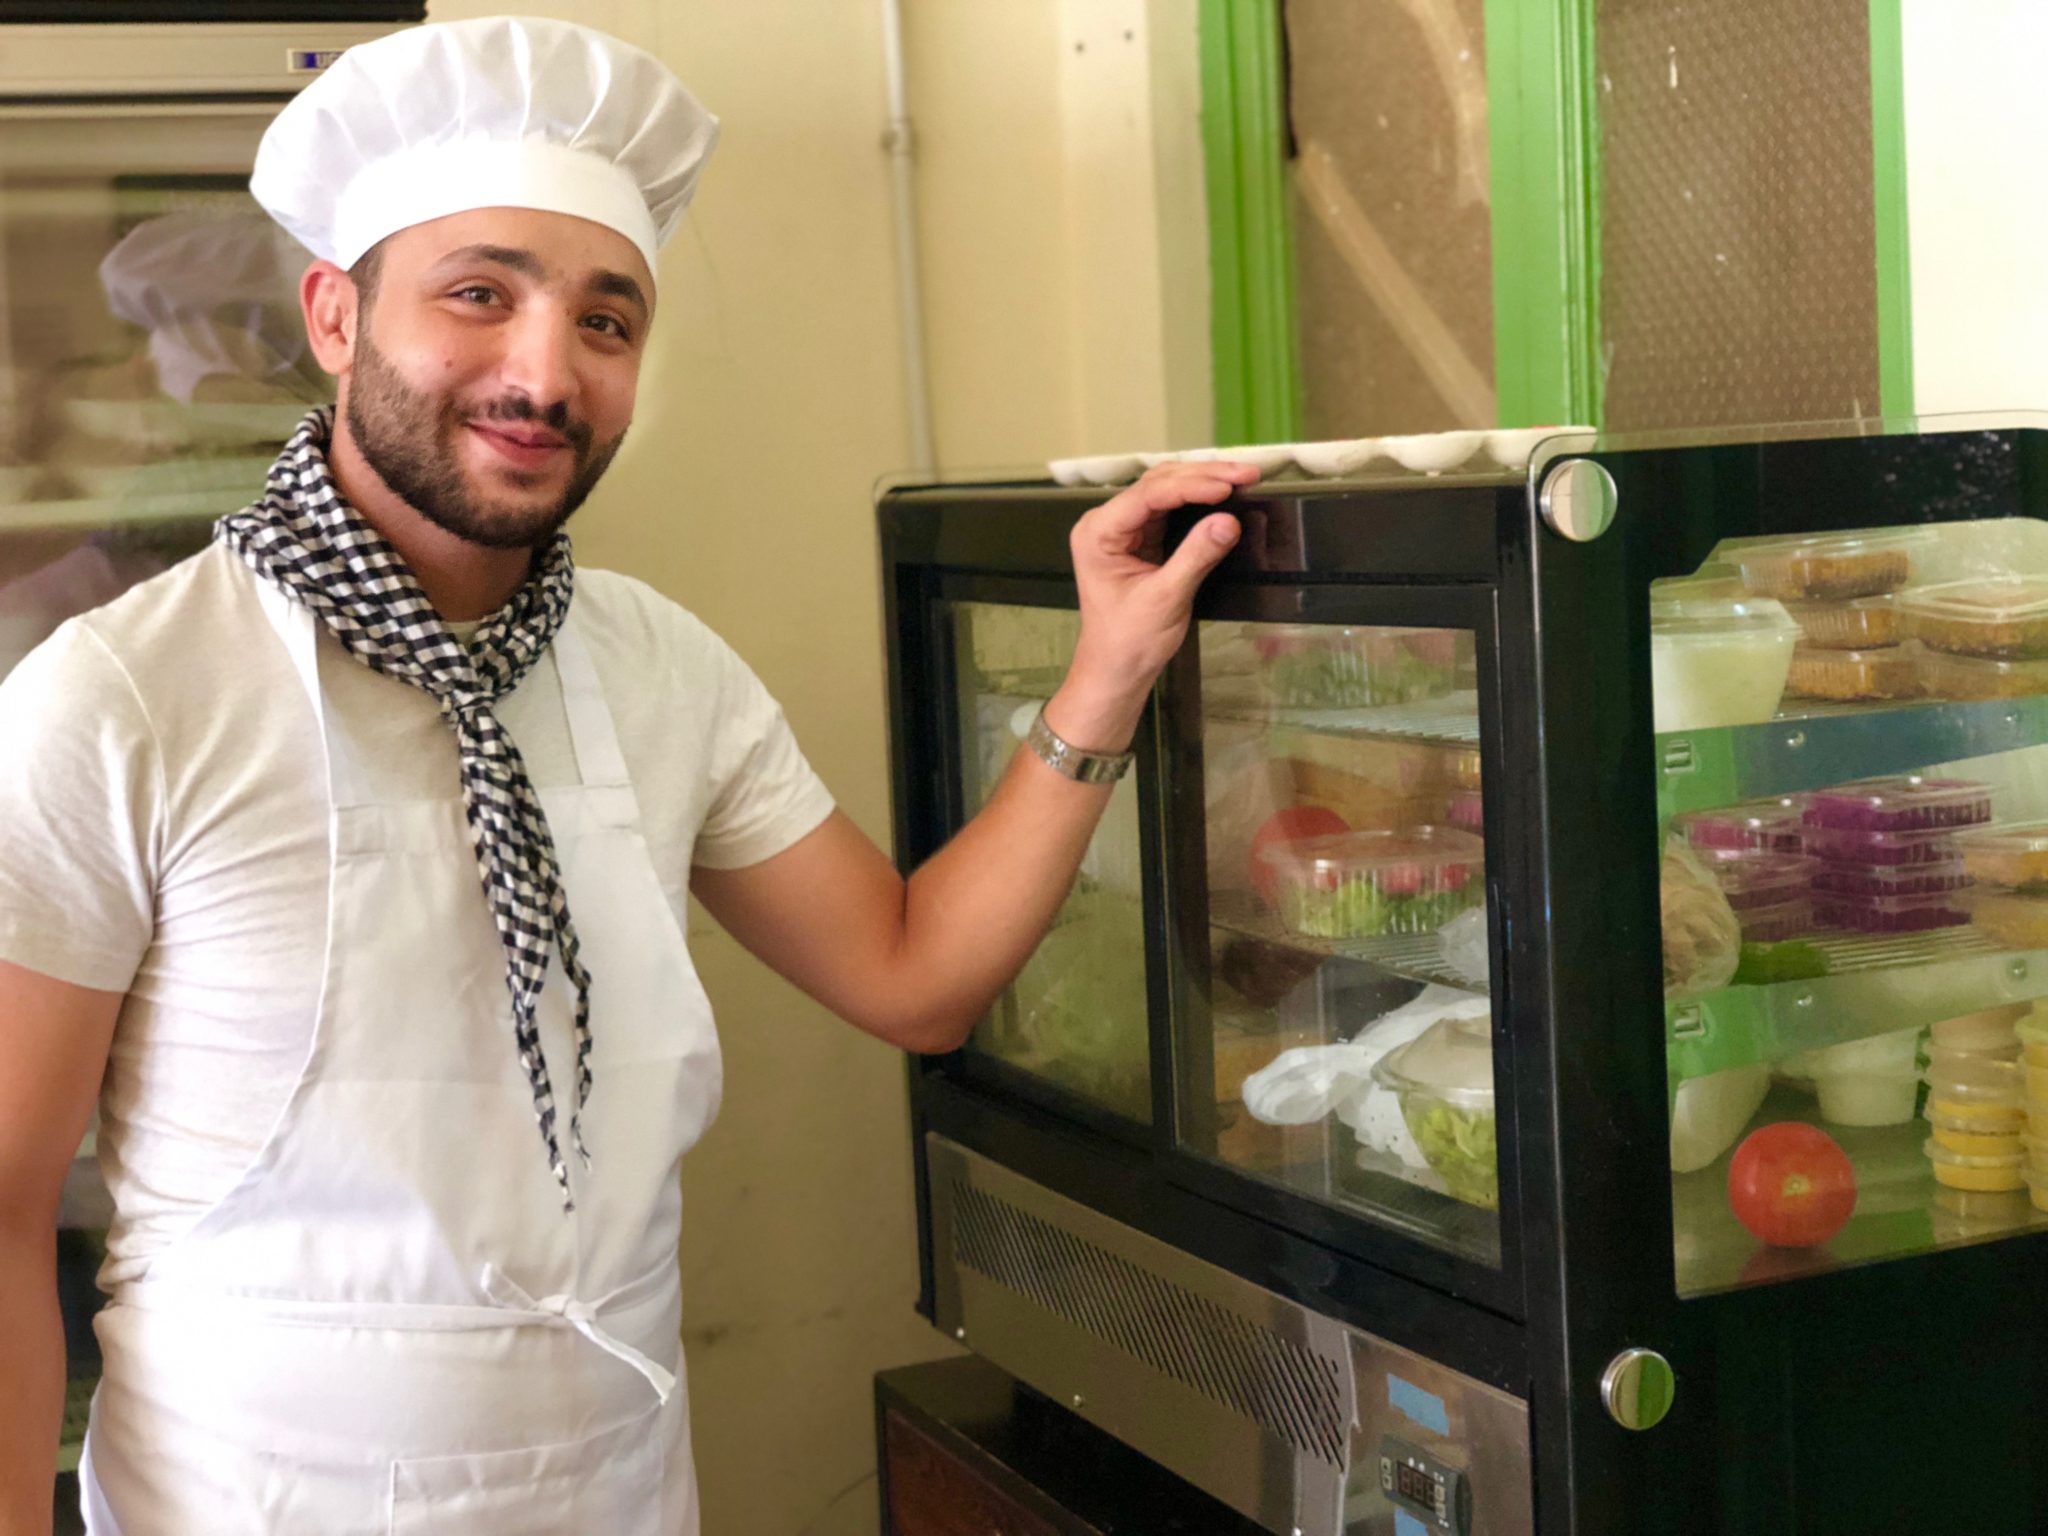 Chef Ahmad standing next to his dips and sauces fridge.